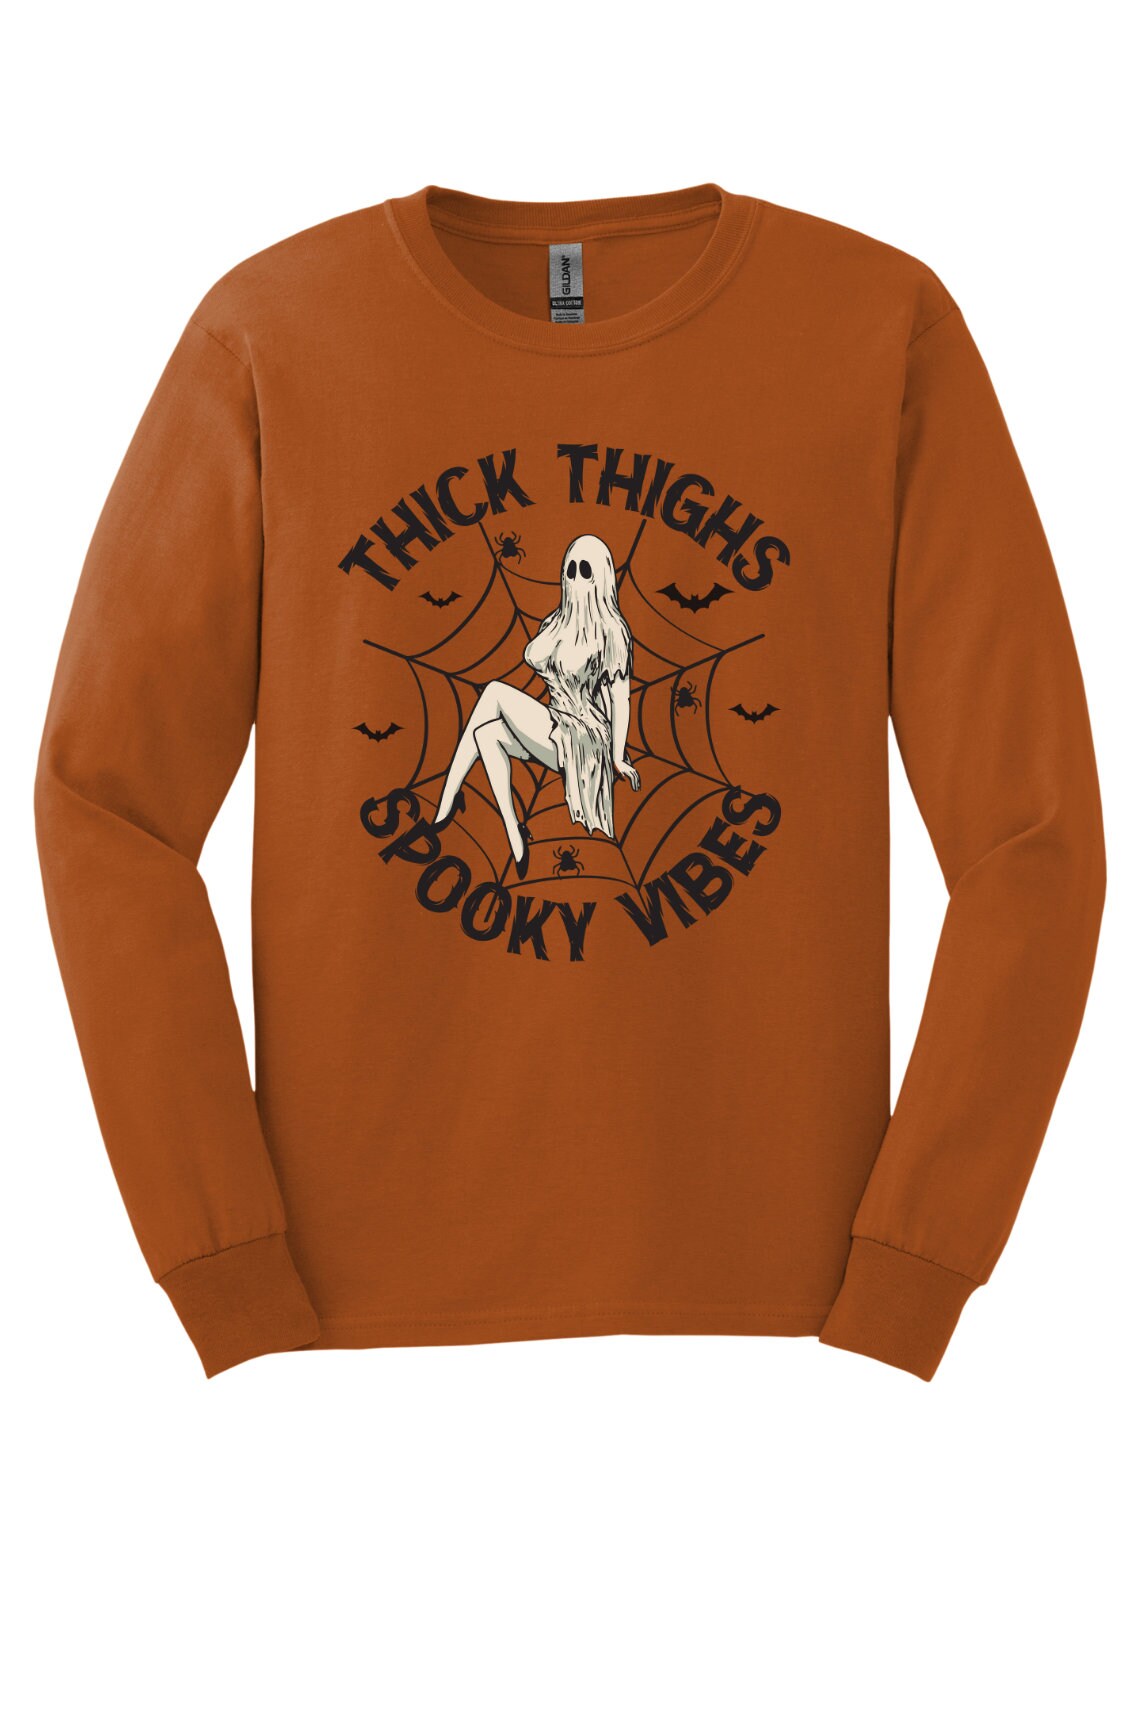 Thick Thighs Spooky Vibes Long Sleeve, Cotton, Women and Unisex Adult Tee